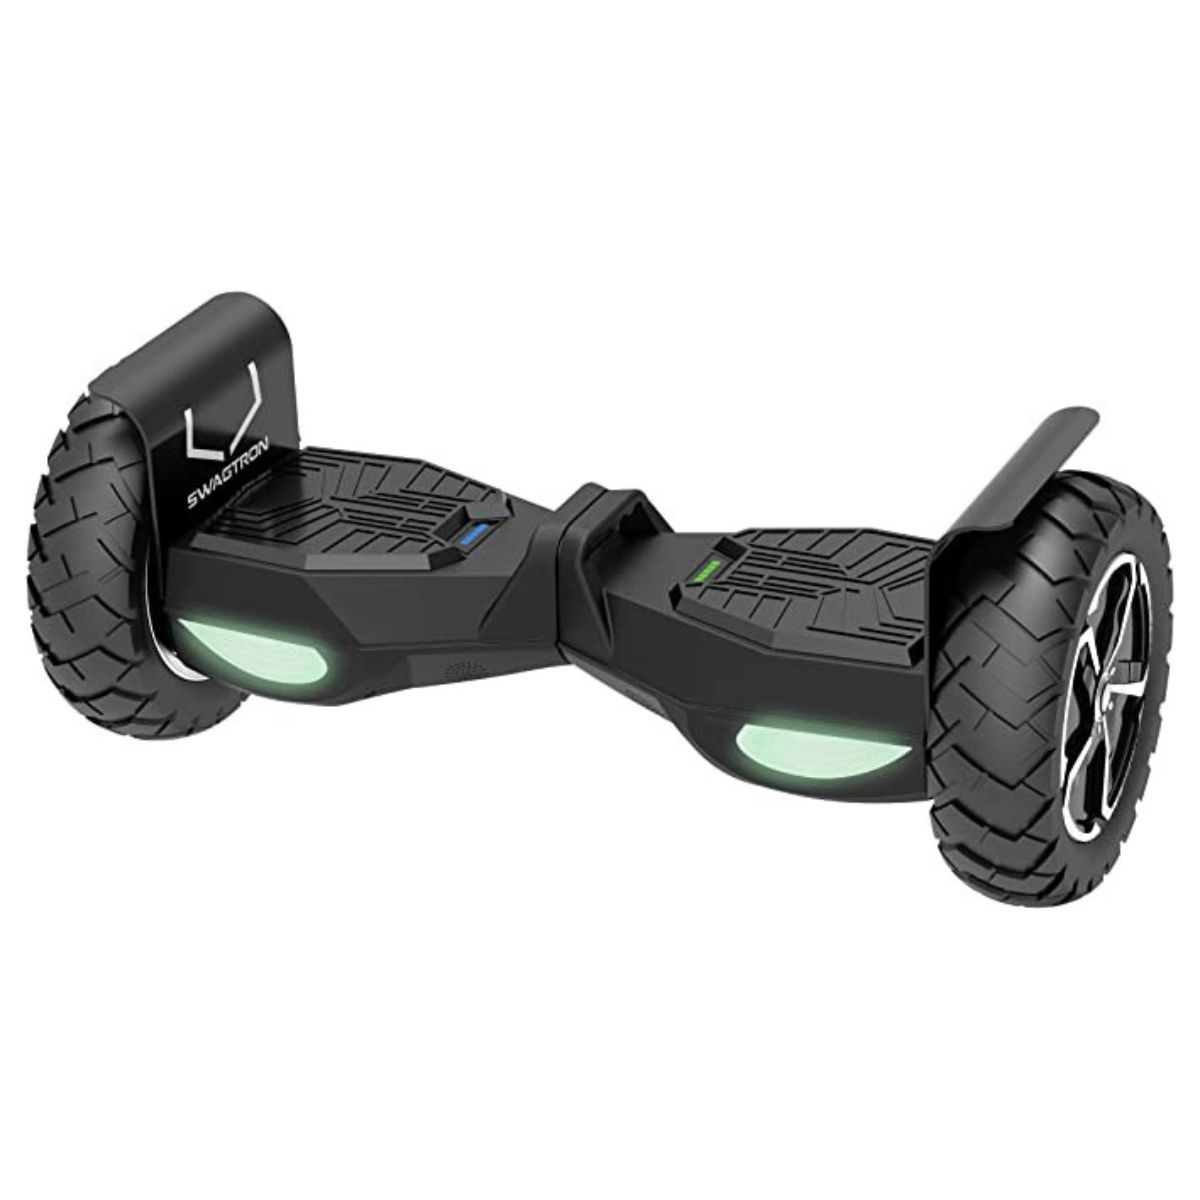 Swagboard Outlaw T6 Off-Road Hoverboard